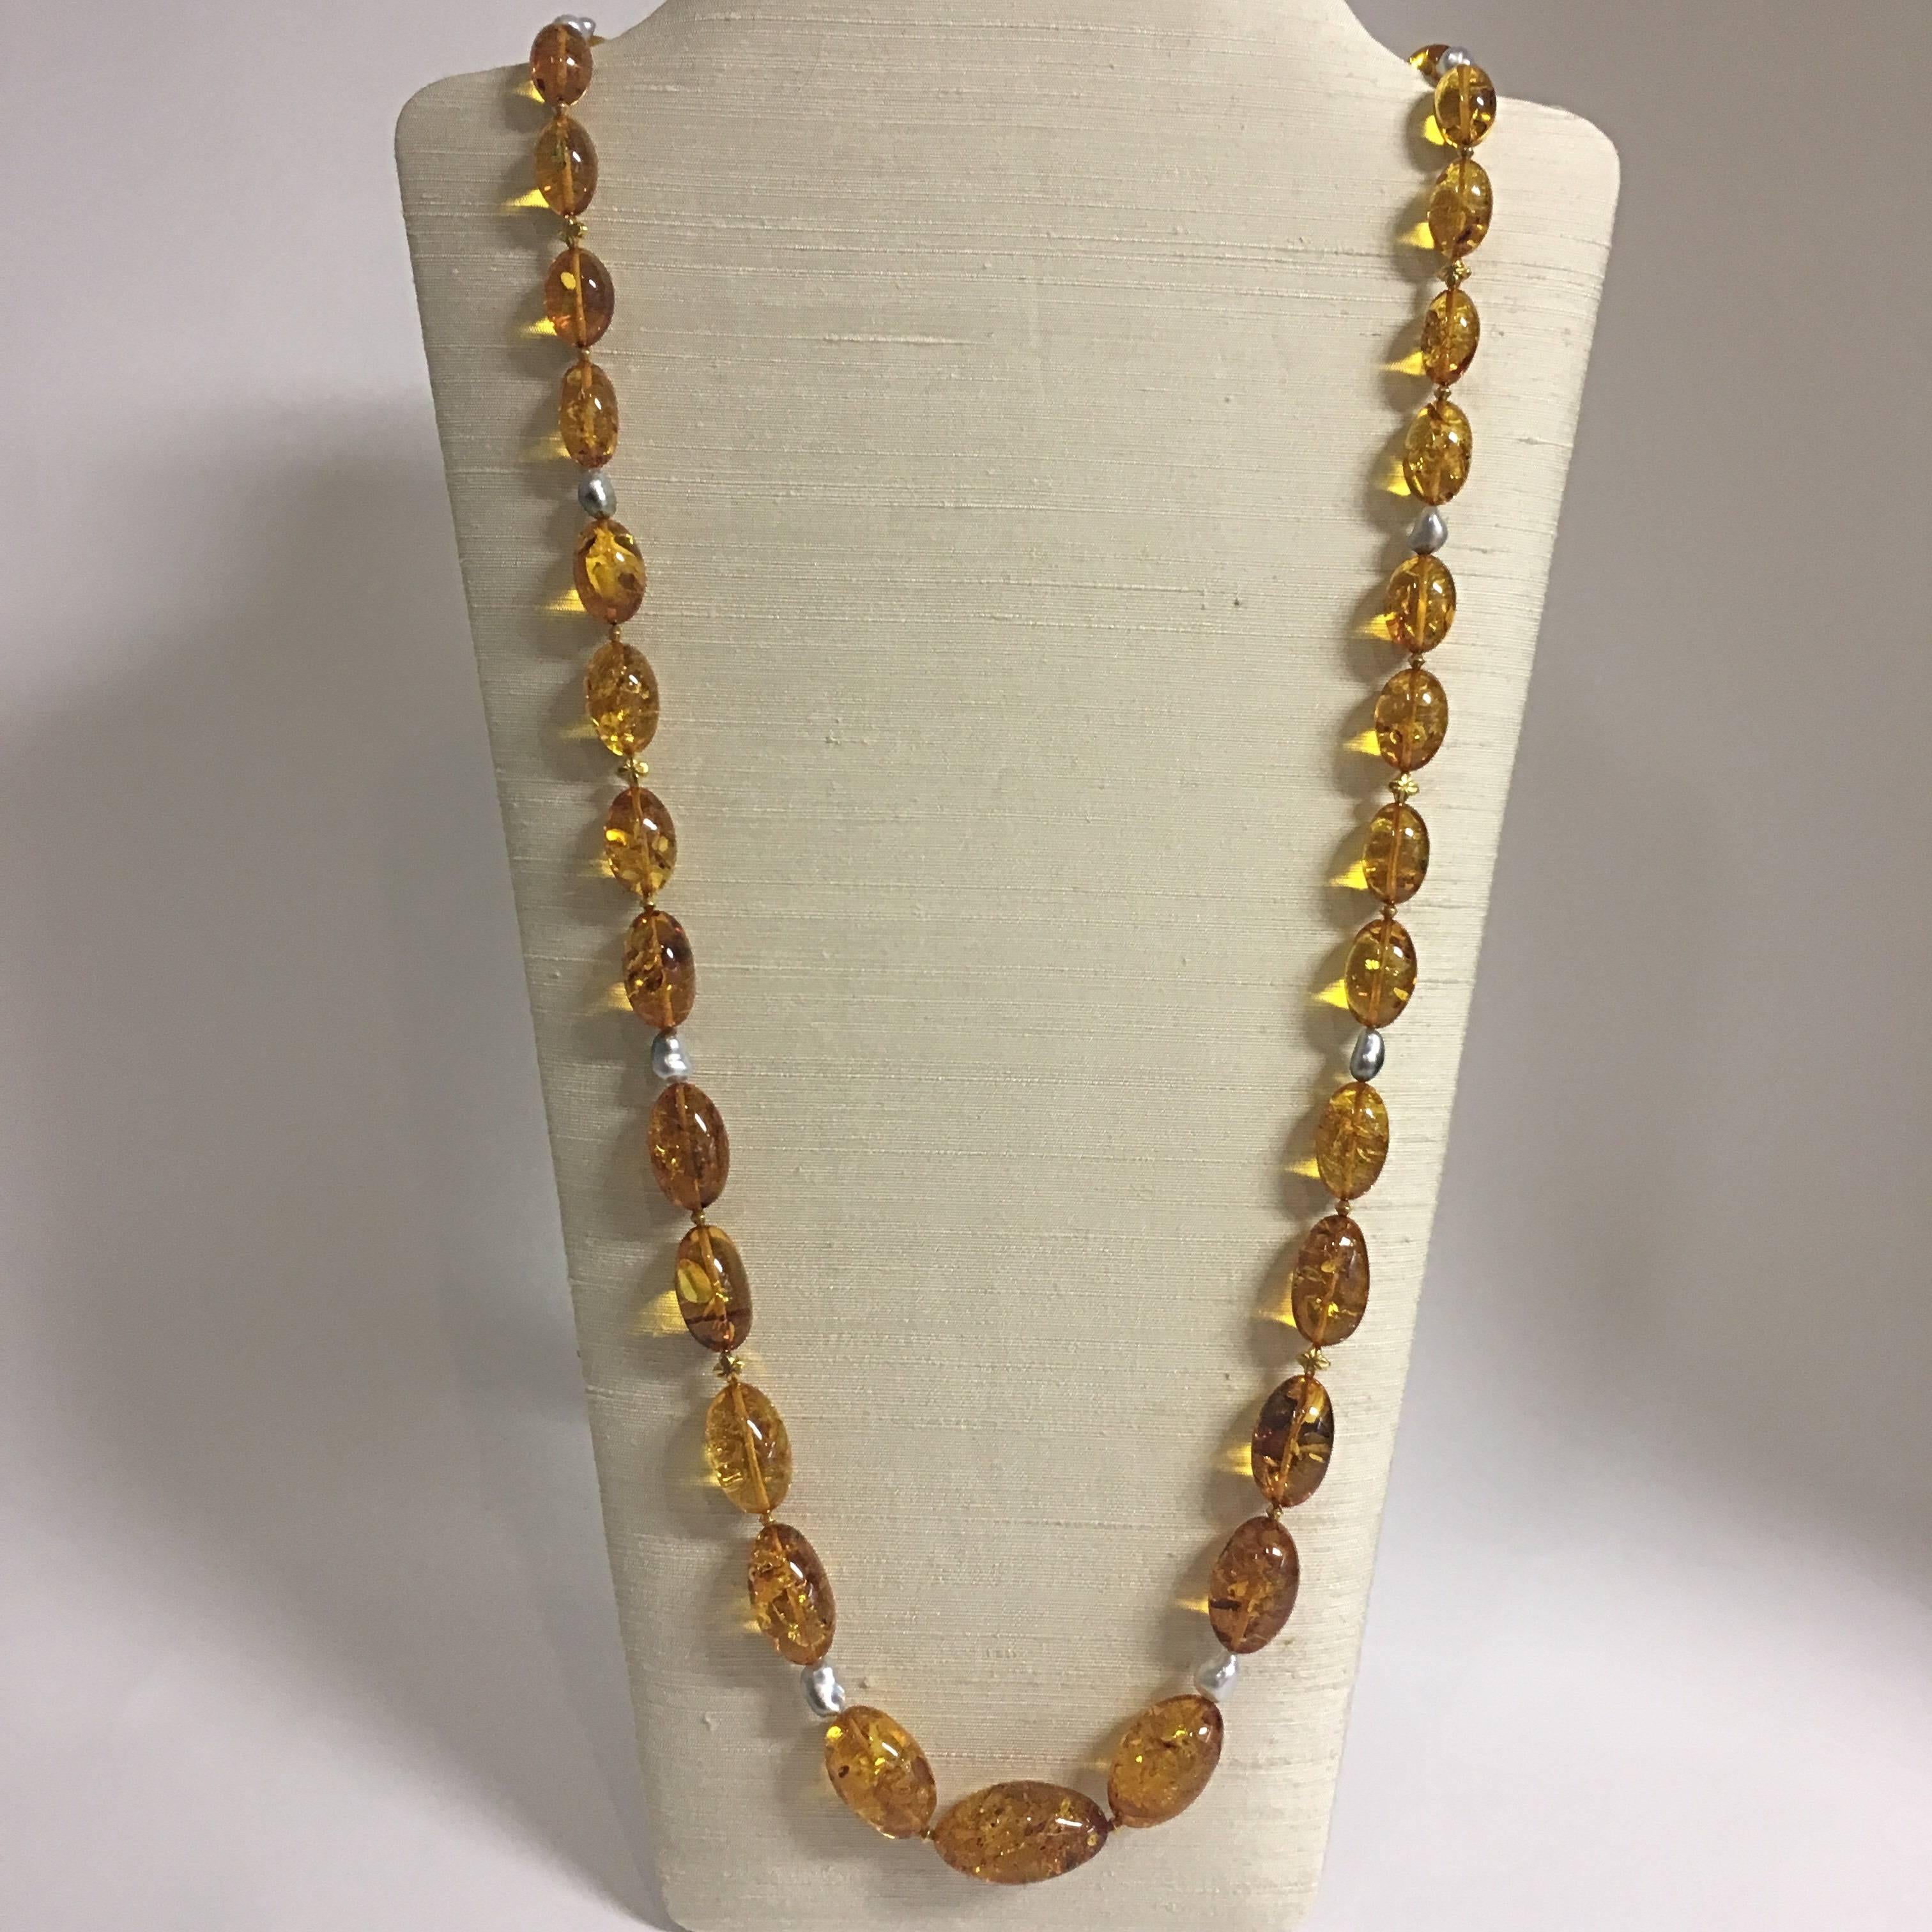 A charming 39”L (99cmL) necklace with graduating oval Baltic amber beads, ranging from 1/2”L (1.3cmL) to 1 ¼”L (3cmL) in honey colour, separated by baroque South Sea pearls and 18 Karat gold beads in diamond and star shapes, and 18 Karat gold clasp.